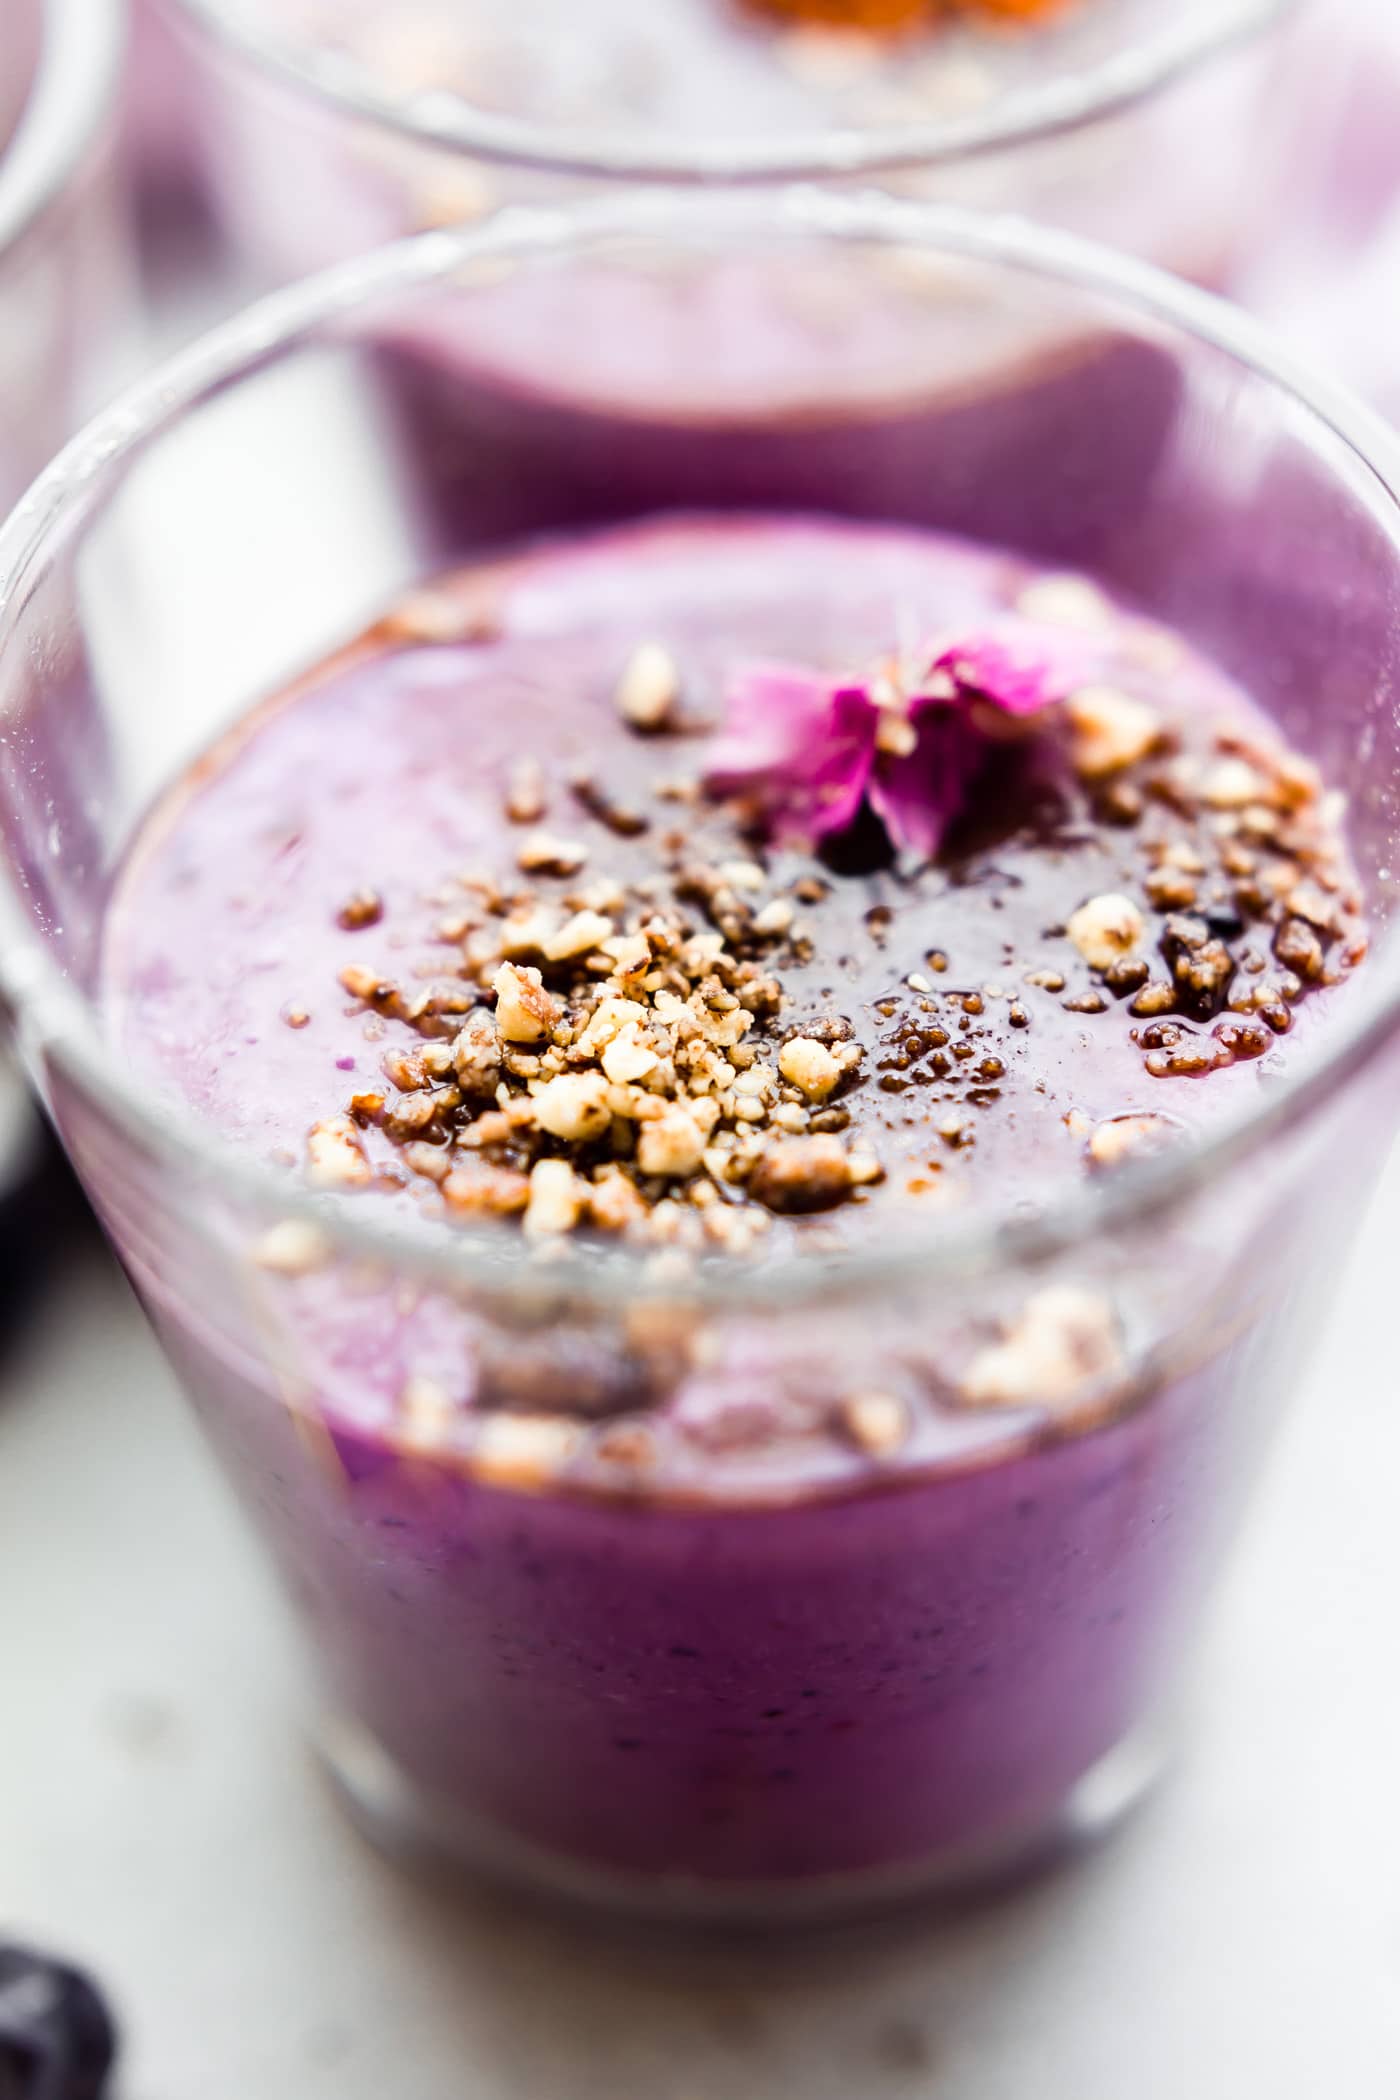 Berry Mini Cheesecake Smoothies packed with protein, wholesome ingredients, & vegan option. No protein powder needed. A tasty breakfast or healthy dessert!